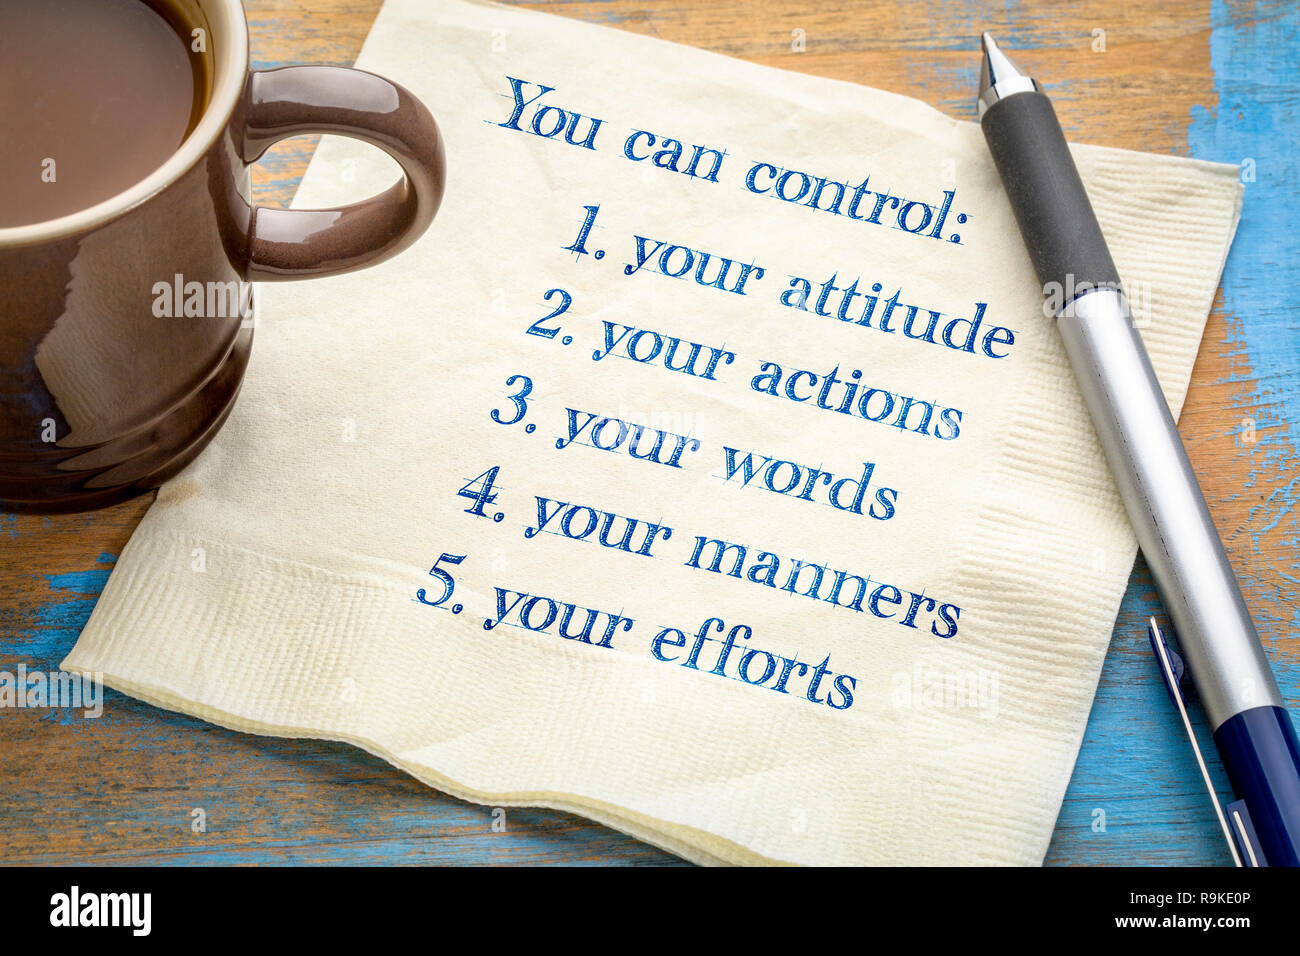 You can control your attitude, actions, words, manners. efforts - handwriting on a napkin with a cup of coffee Stock Photo